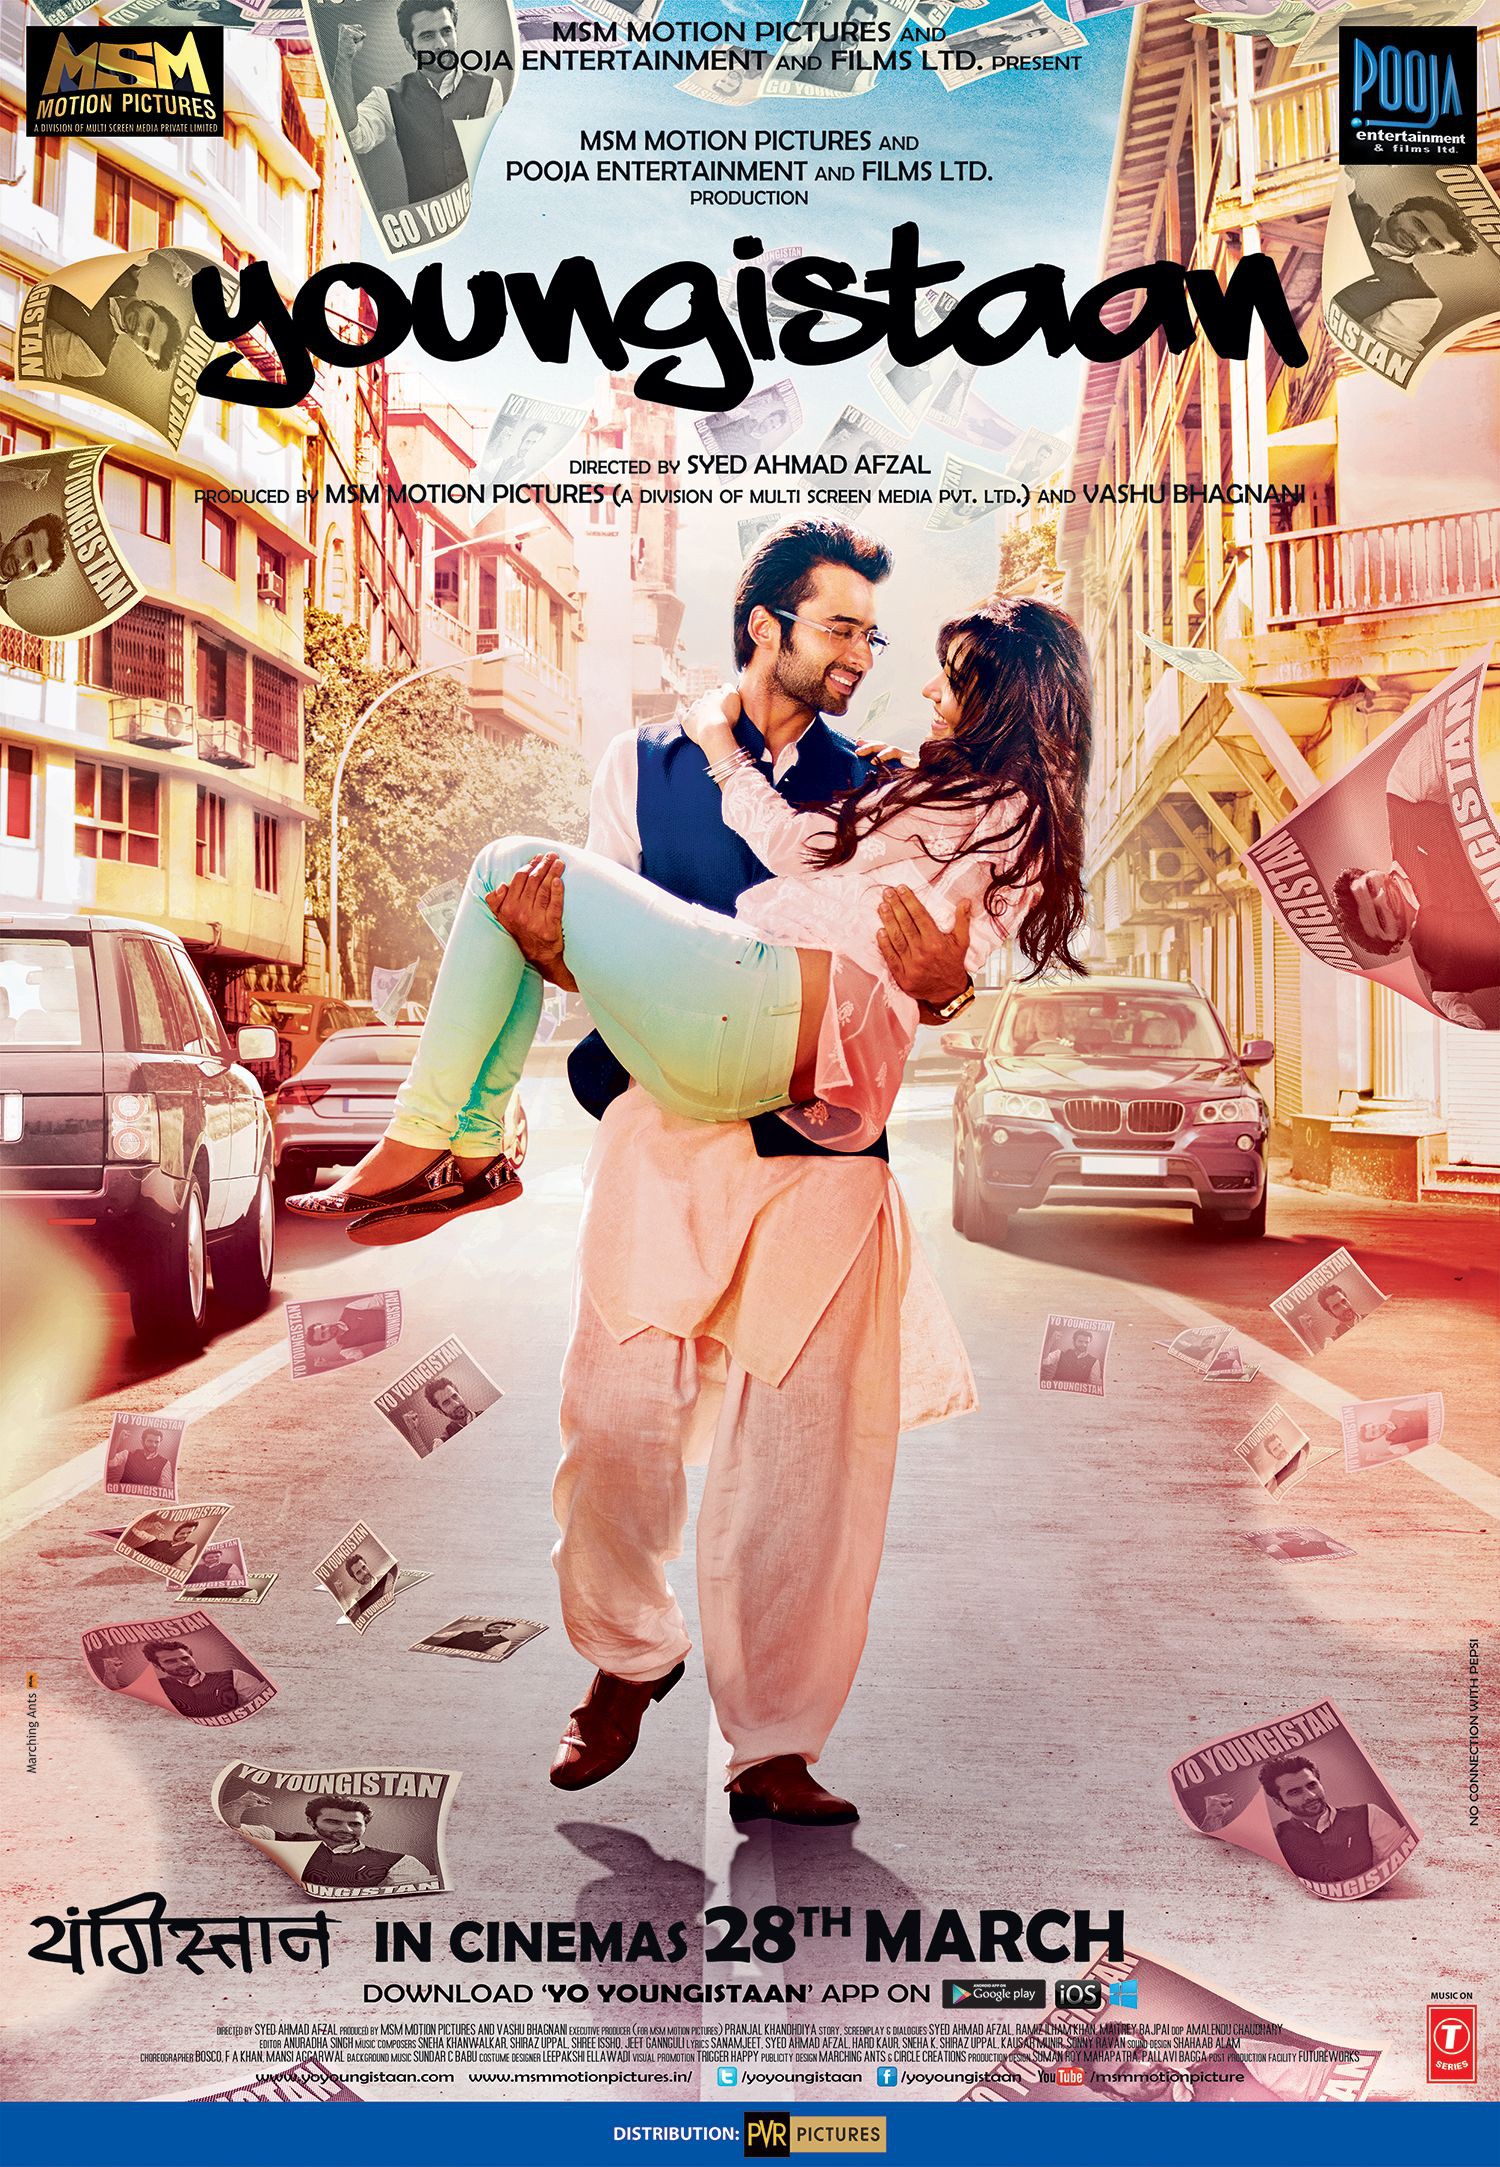 Mega Sized Movie Poster Image for Youngistaan (#2 of 6)